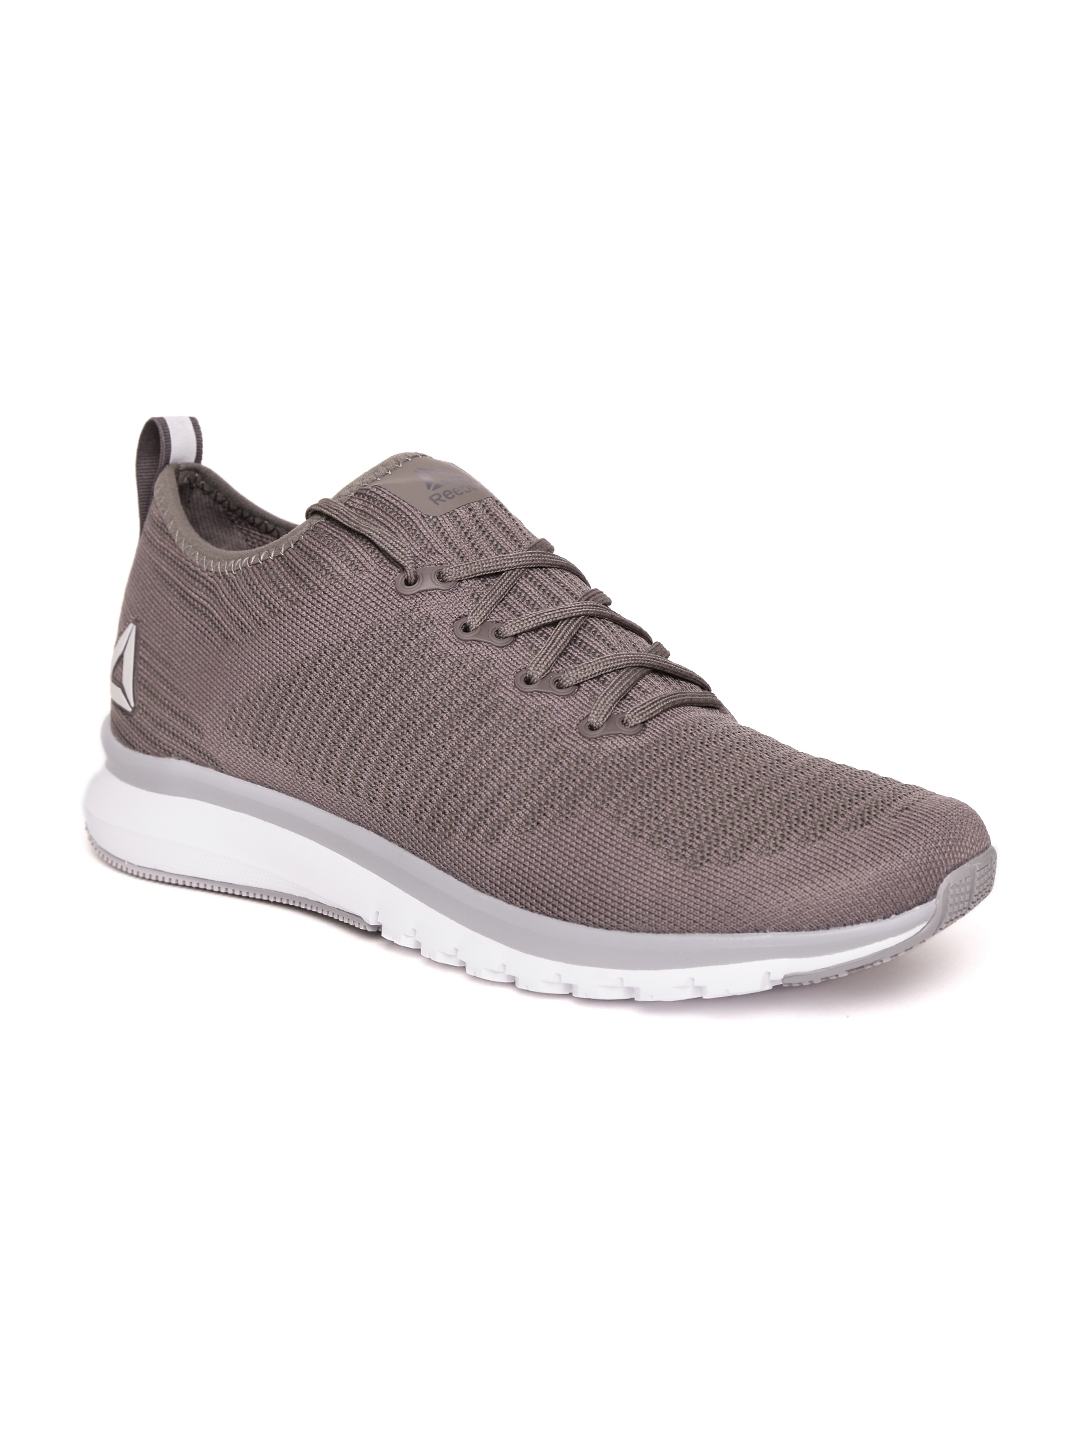 Buy Reebok Men Taupe Print Smooth 2.0 ULTK Training Shoes - Sports Shoes  for Men 2496332 | Myntra